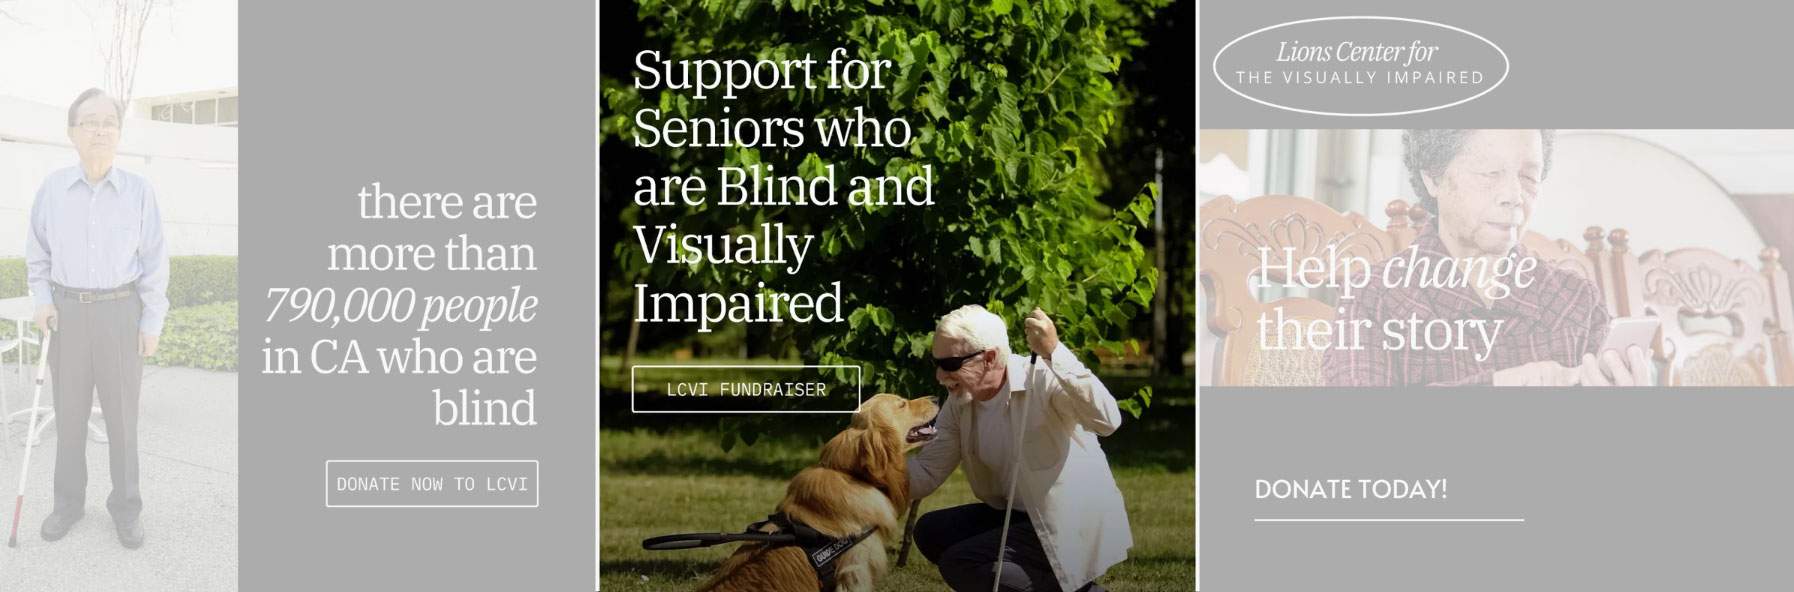 Graphic with text – there are more than 790,000 people in CA who are blind